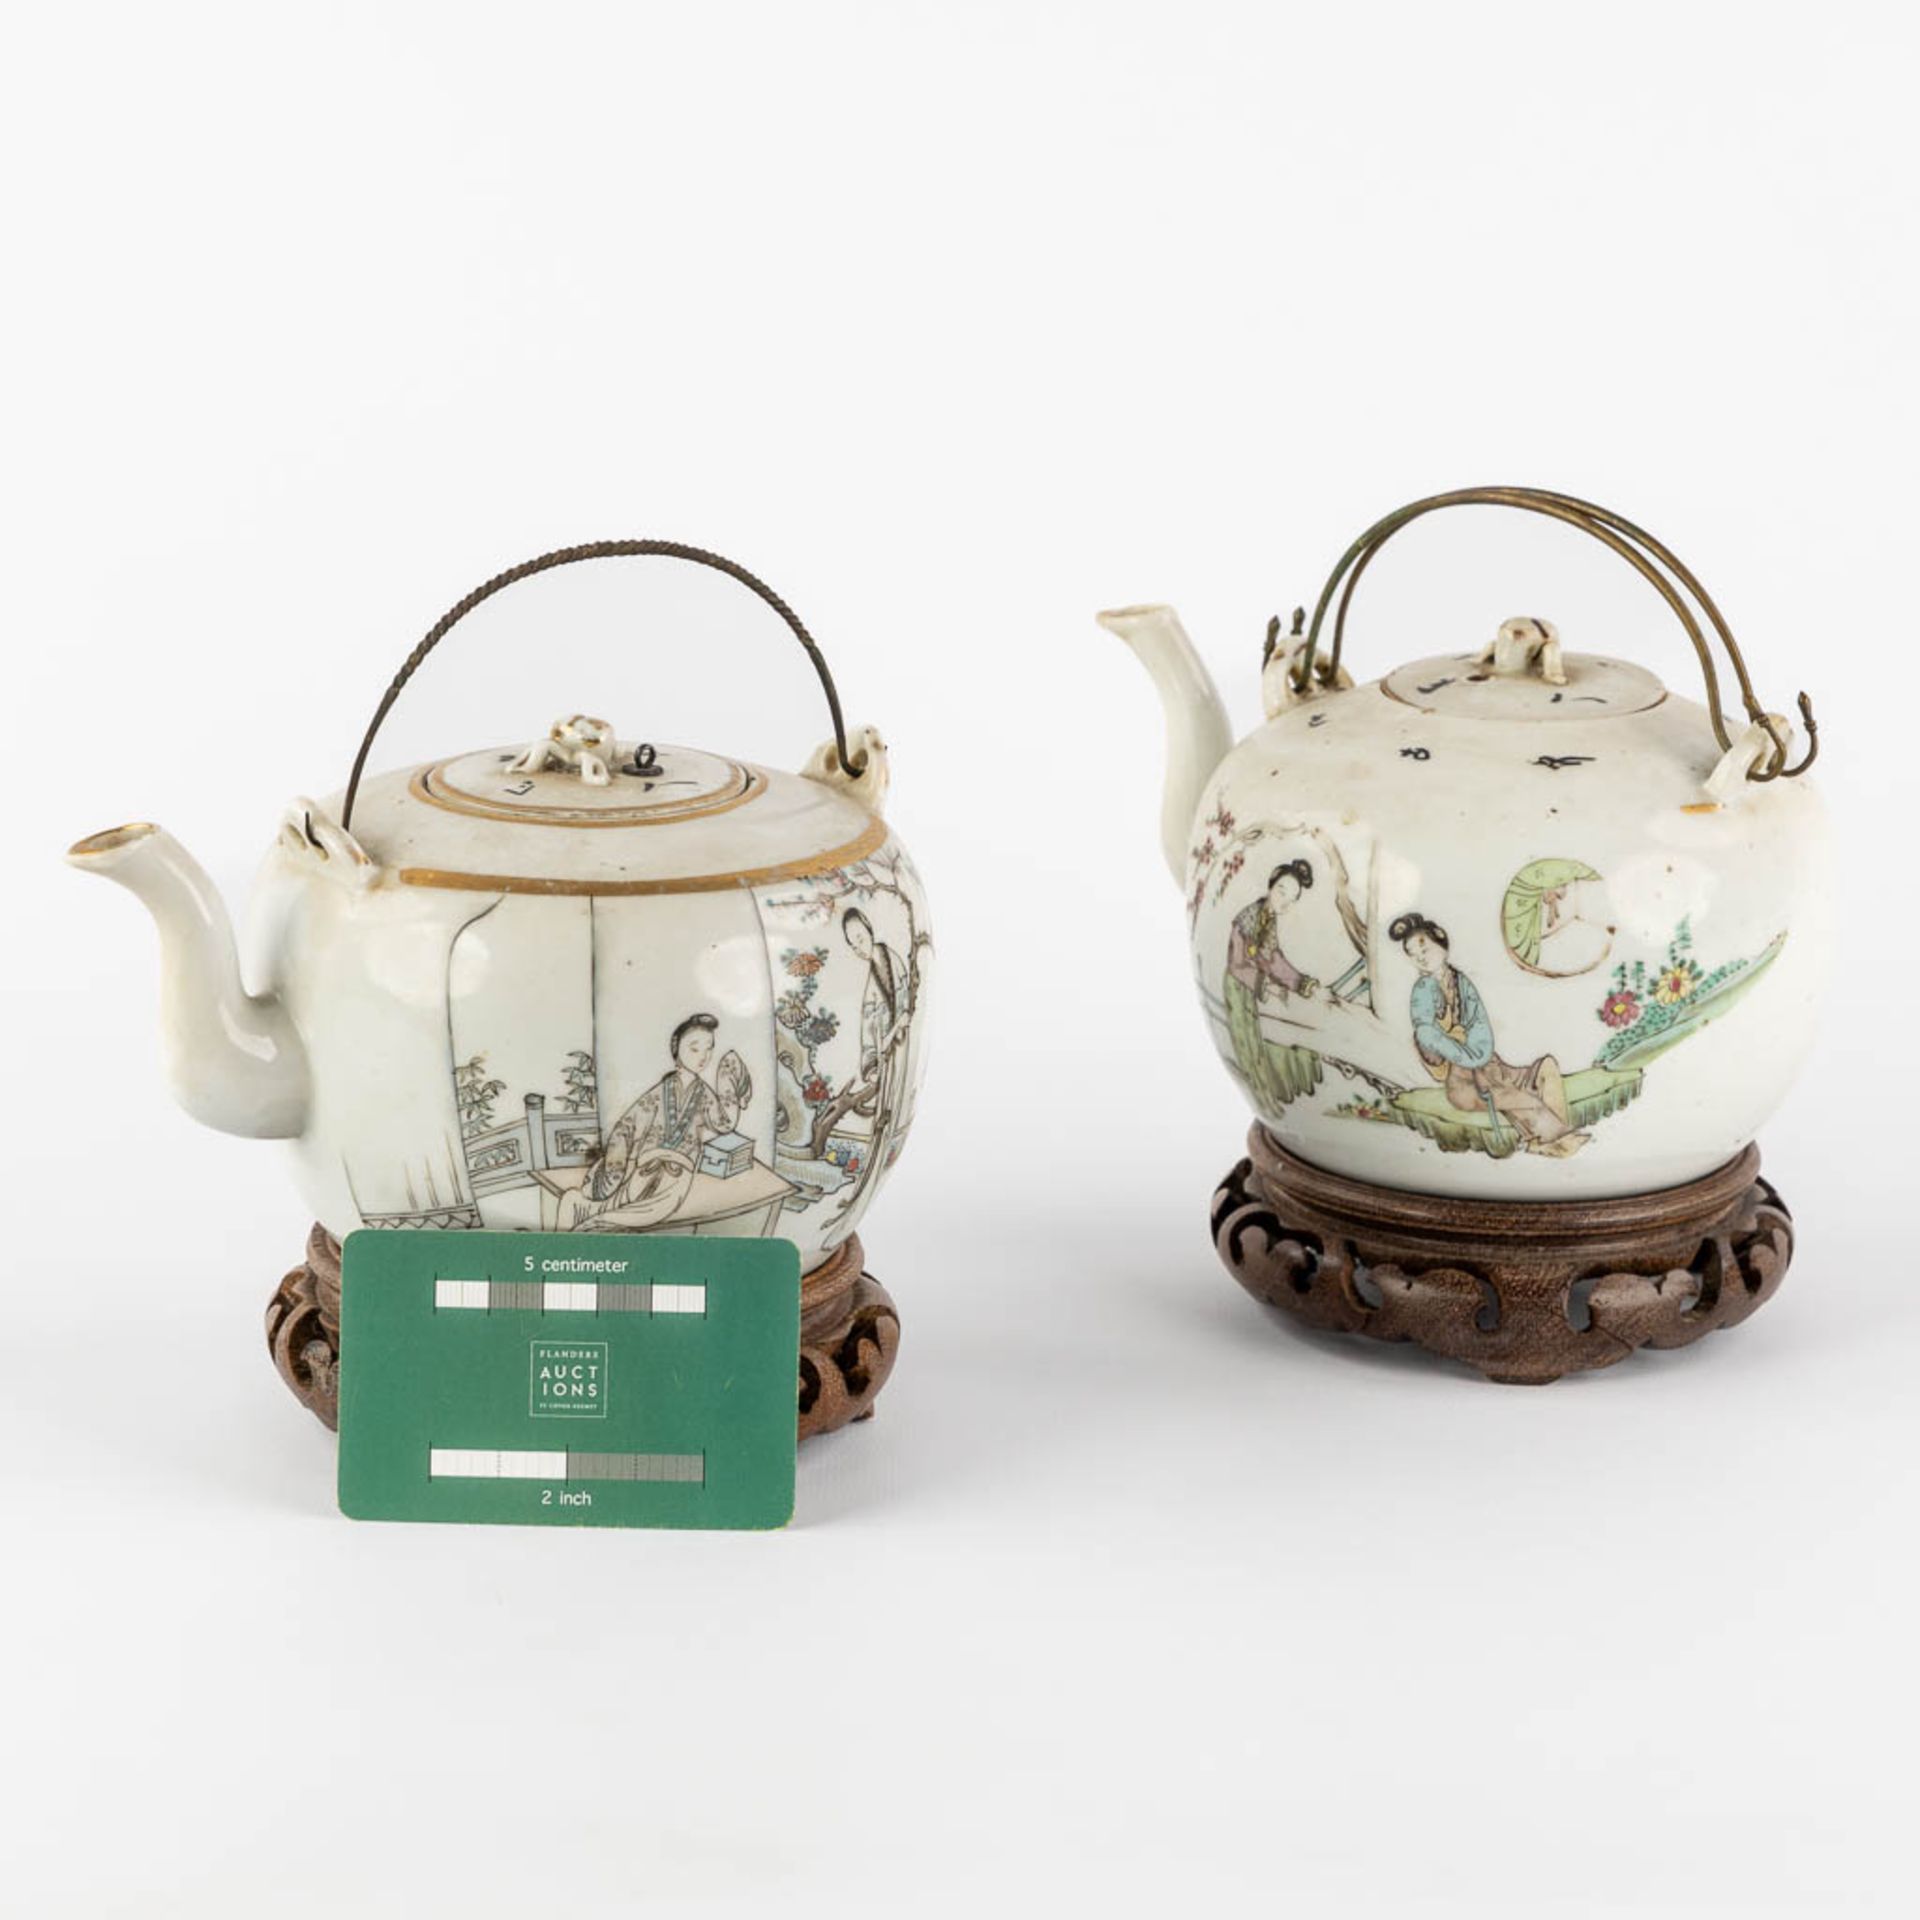 Two Chinese teapots, decorated with figurines. (L:13 x W:17,5 x H:10 cm) - Bild 2 aus 14